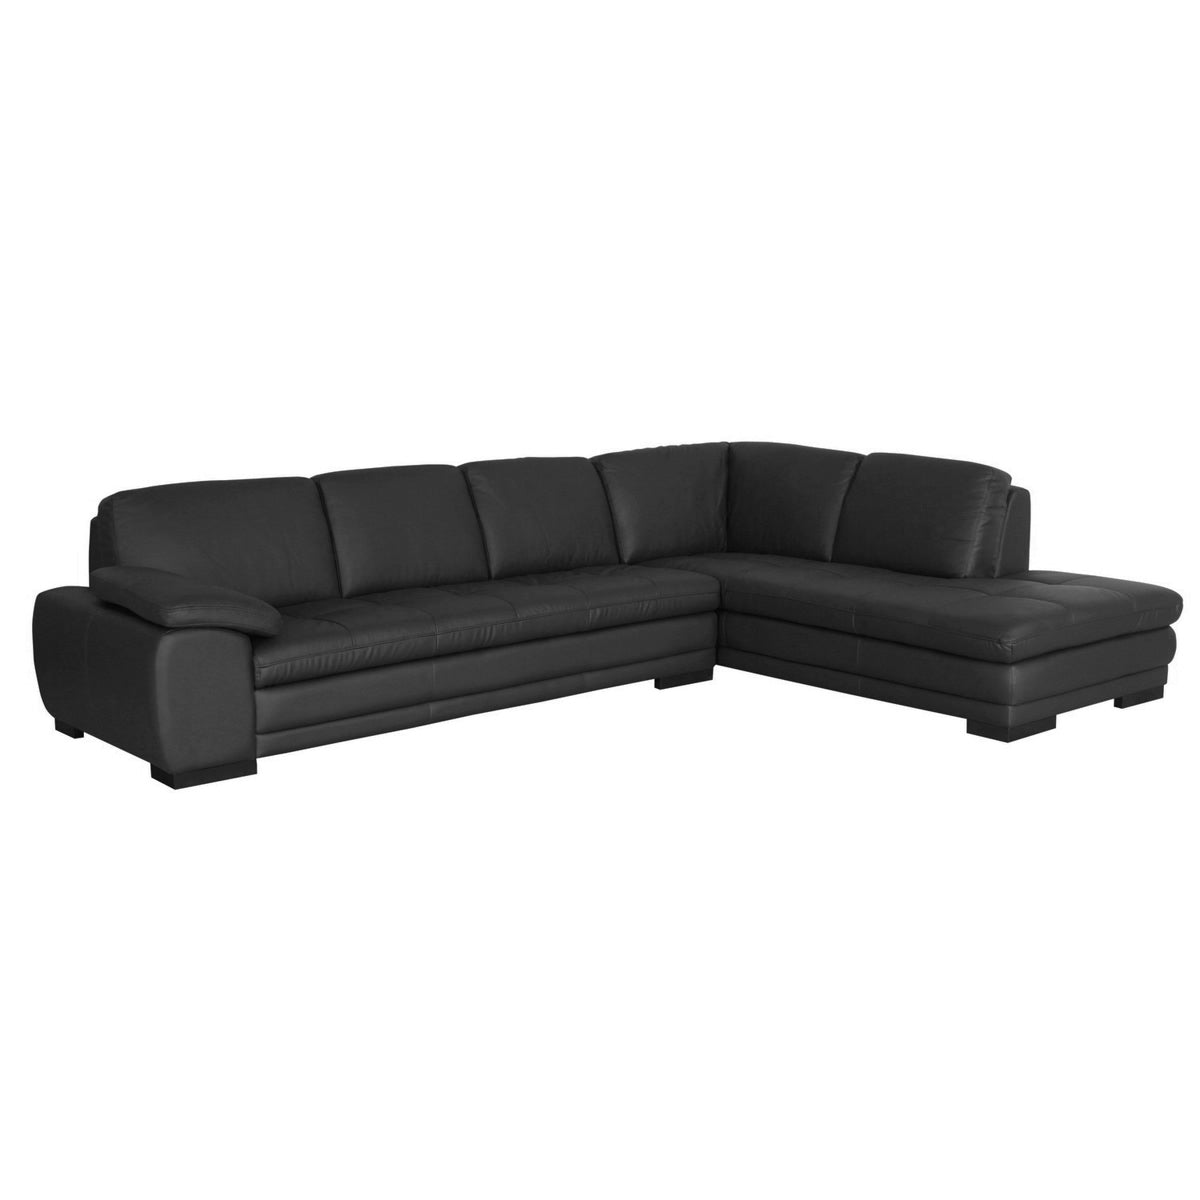 Baxton Studio Black Sofa/Chaise Sectional Baxton Studio-sectionals-Minimal And Modern - 1